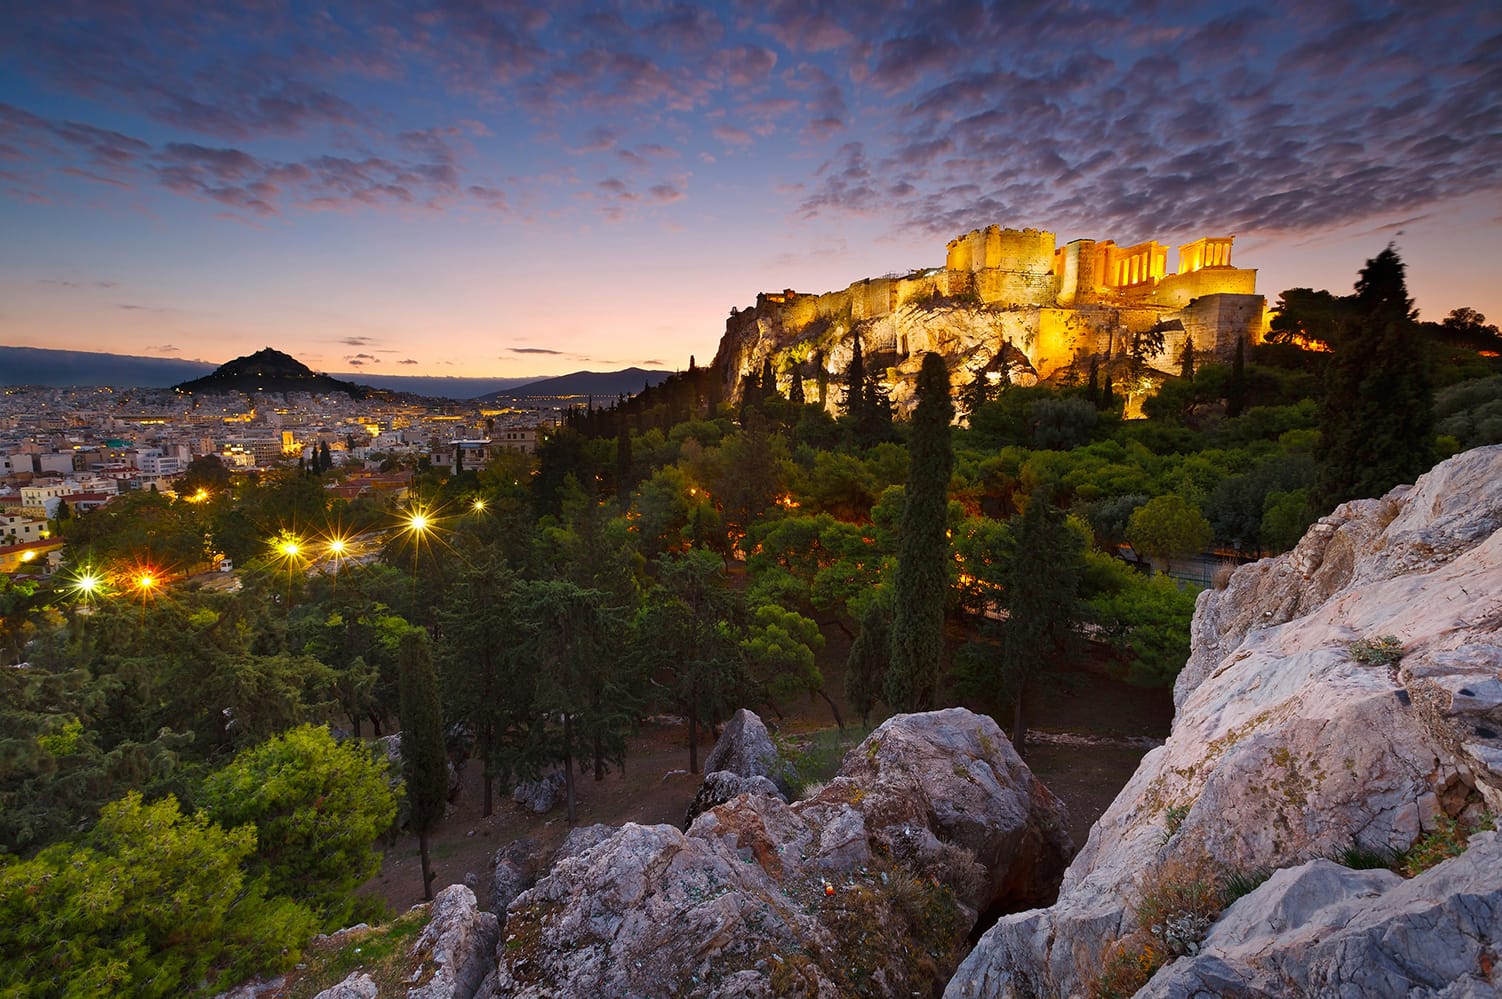 Sunset view of Acropolis and Lycabettus Hill from Areopagus hill in Athens, Greece